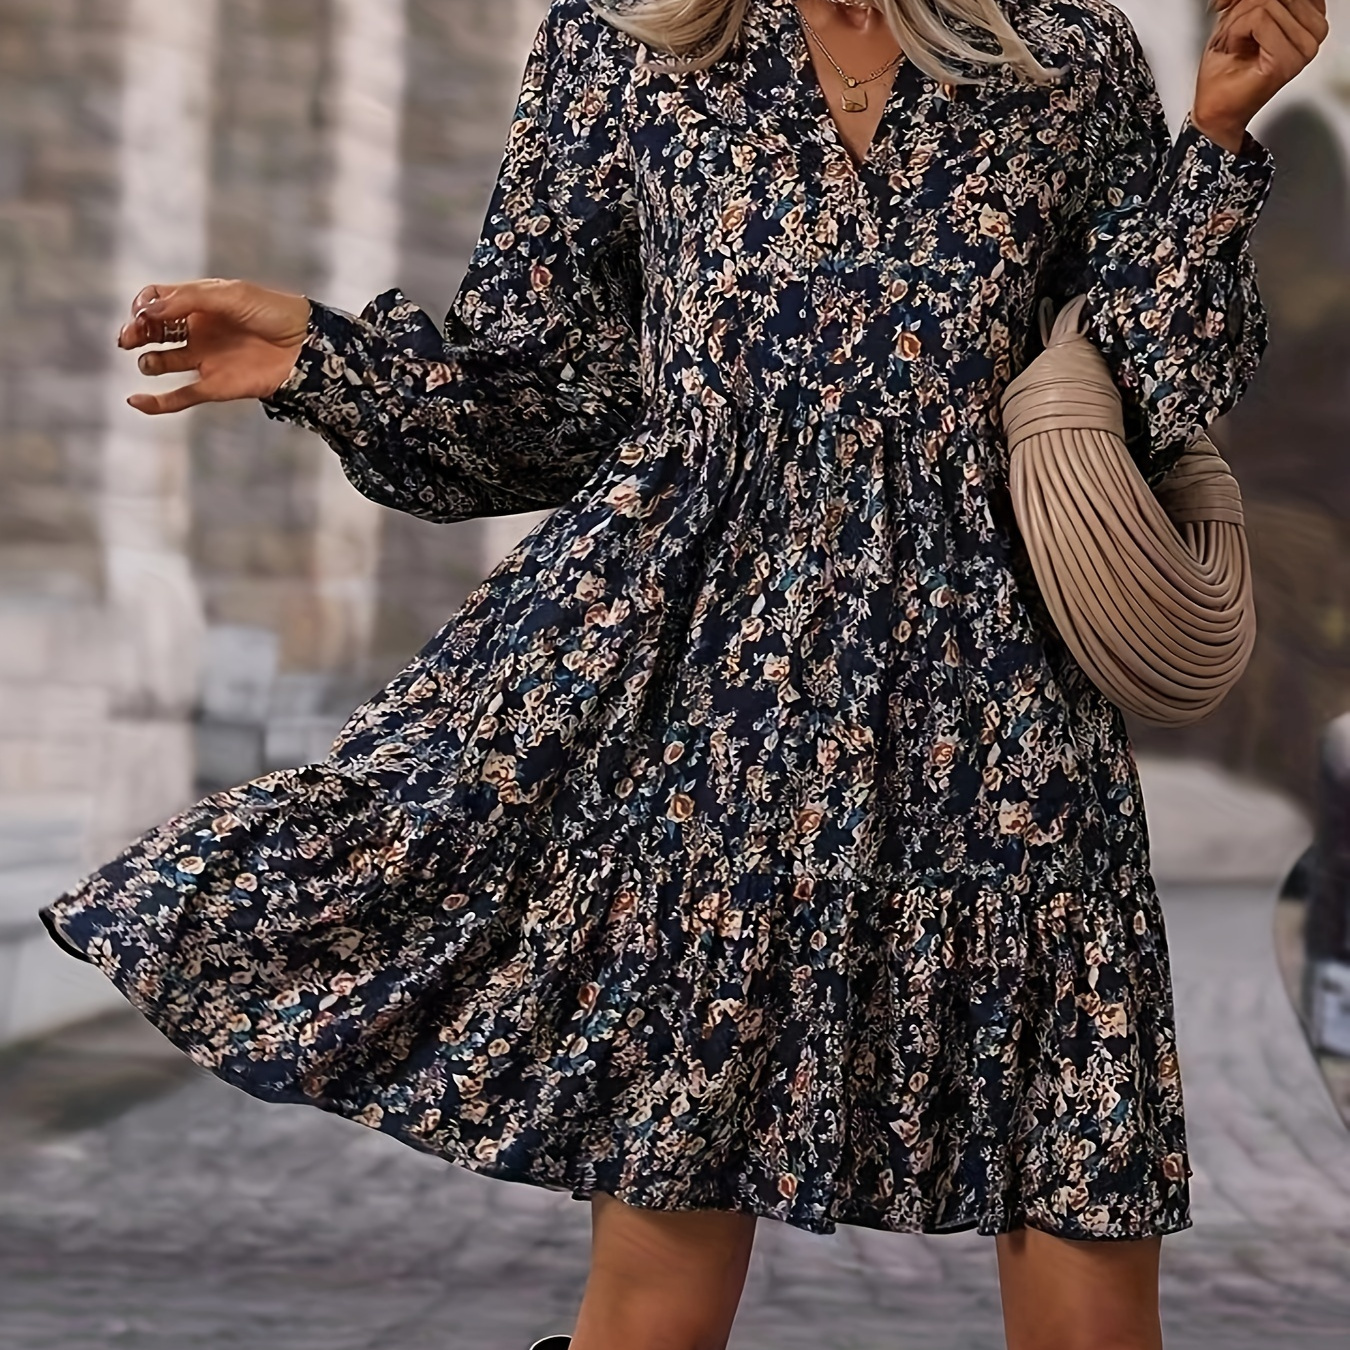 

Ditsy Floral Print Mini Dress, Casual V Neck Tiered Long Sleeve Dress, Women's Clothing